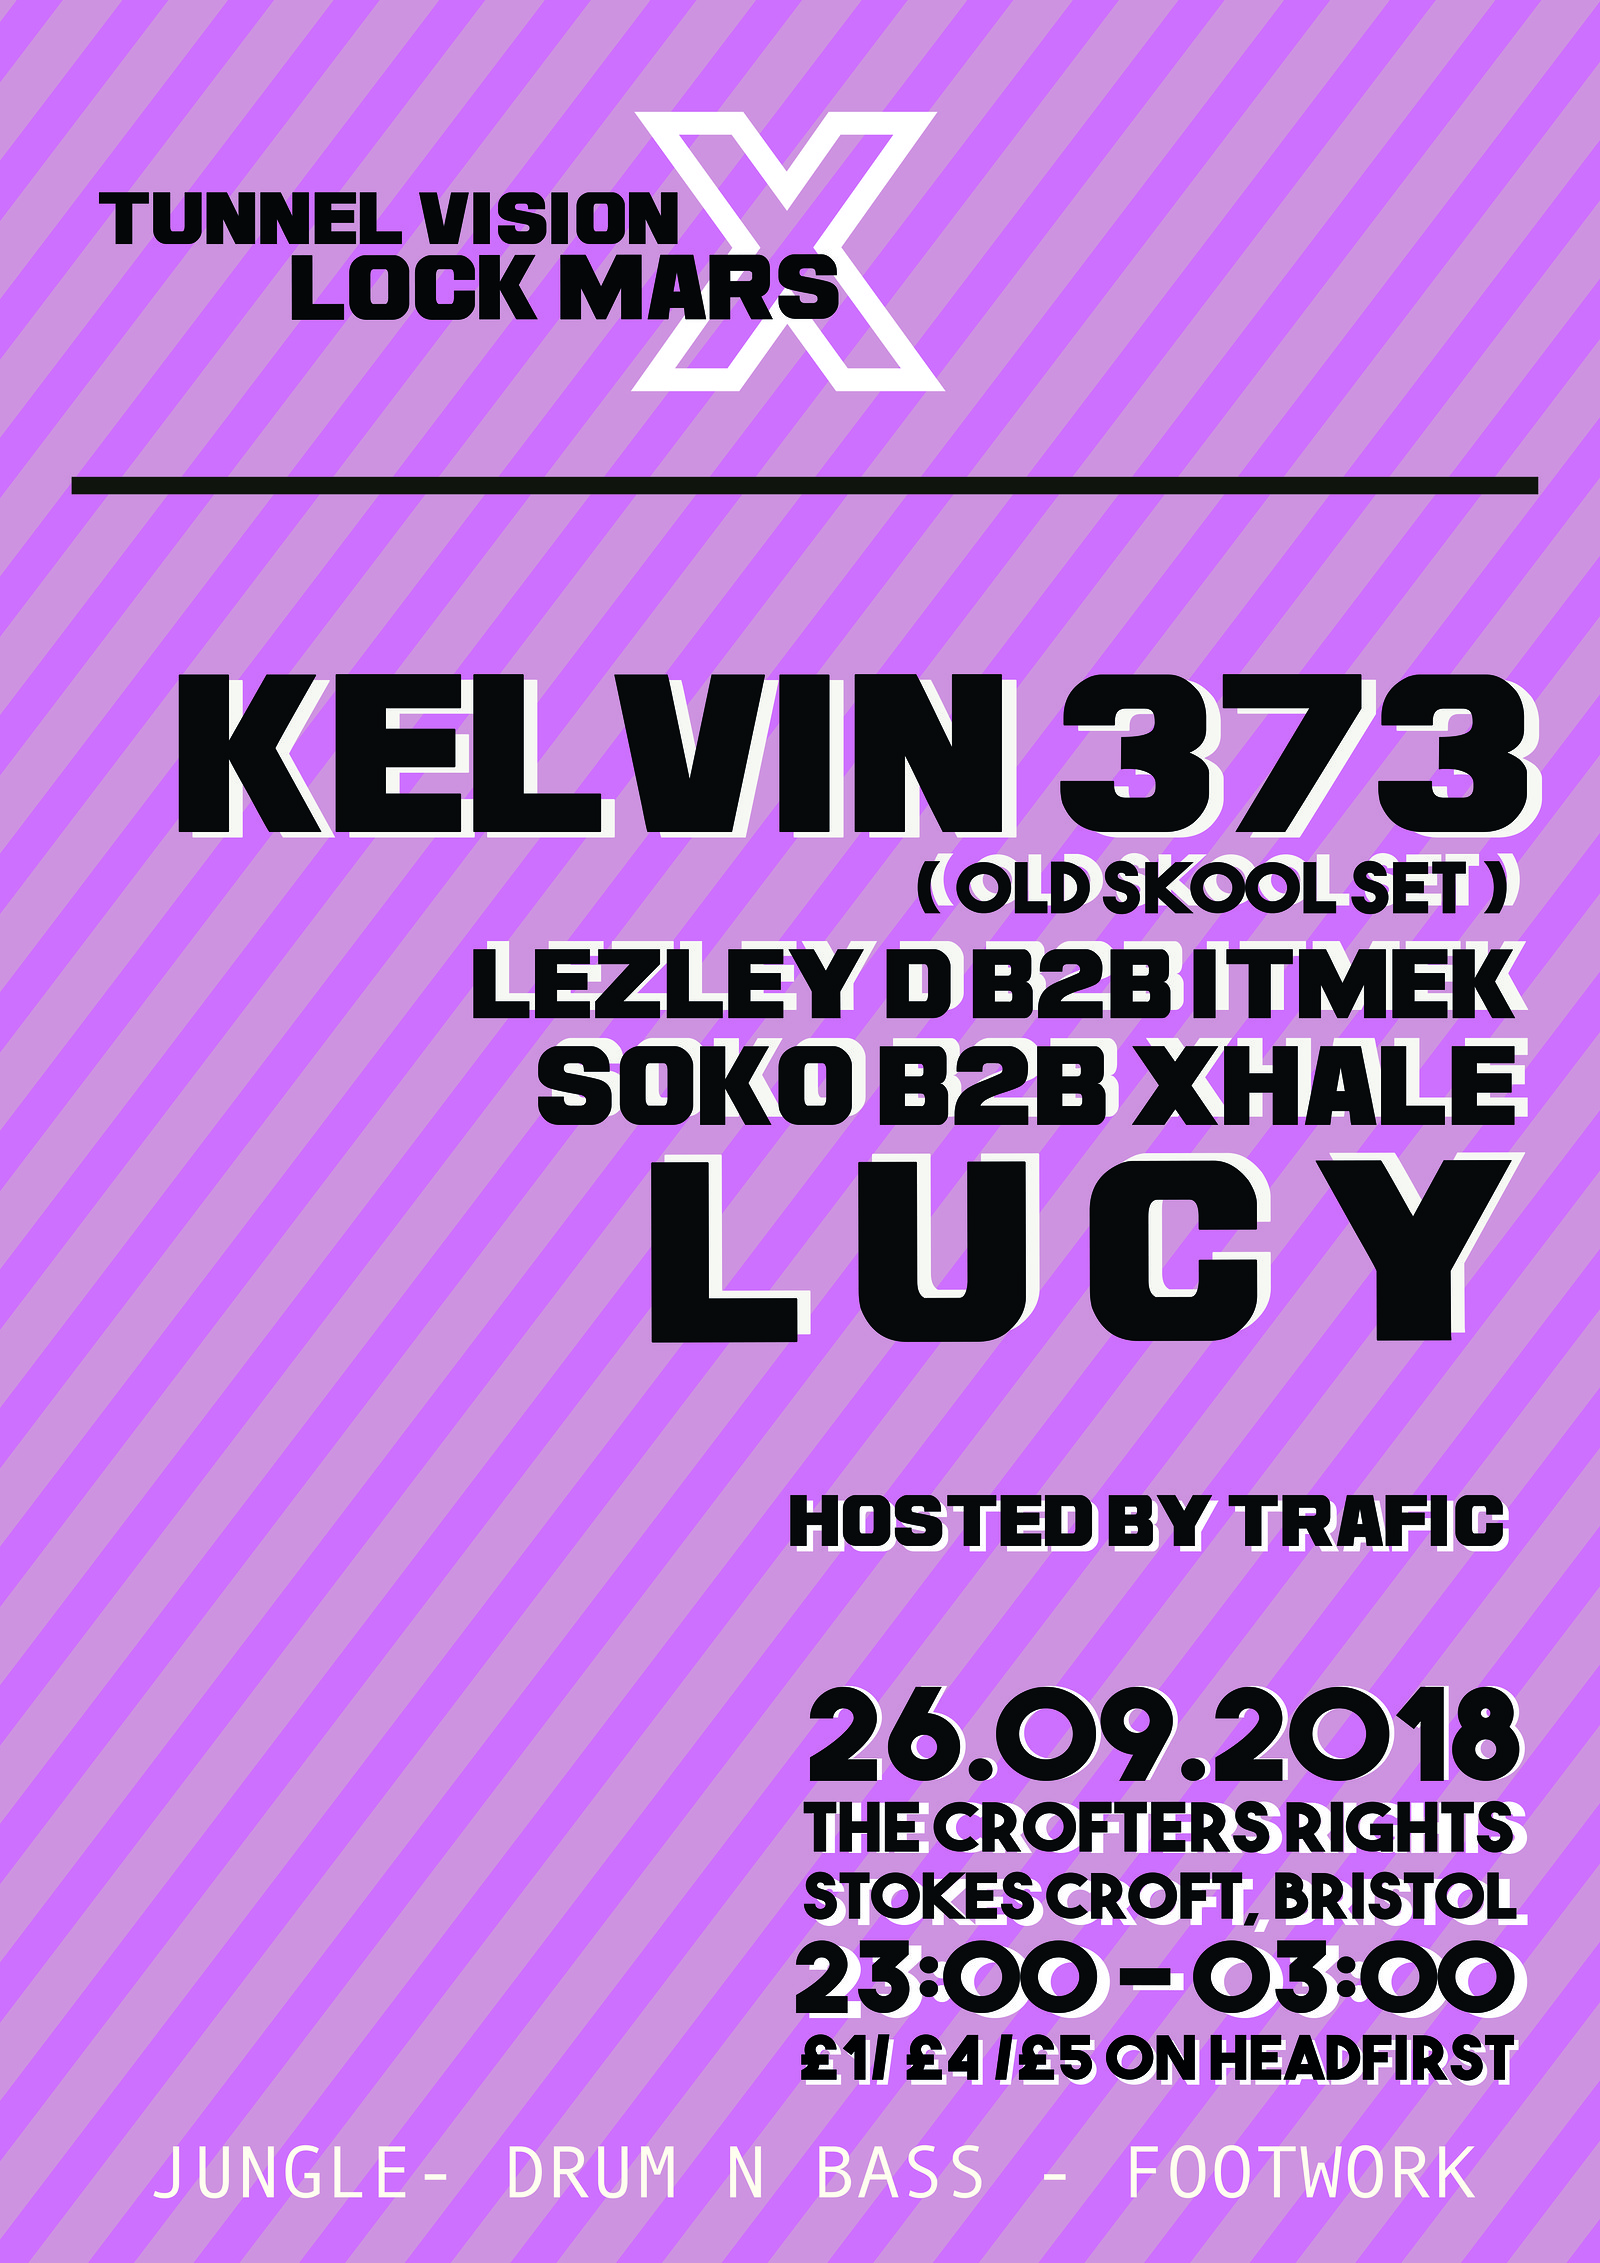 Tunnel Vision x LockMars - Kelvin 373, & Residents at Crofters Rights